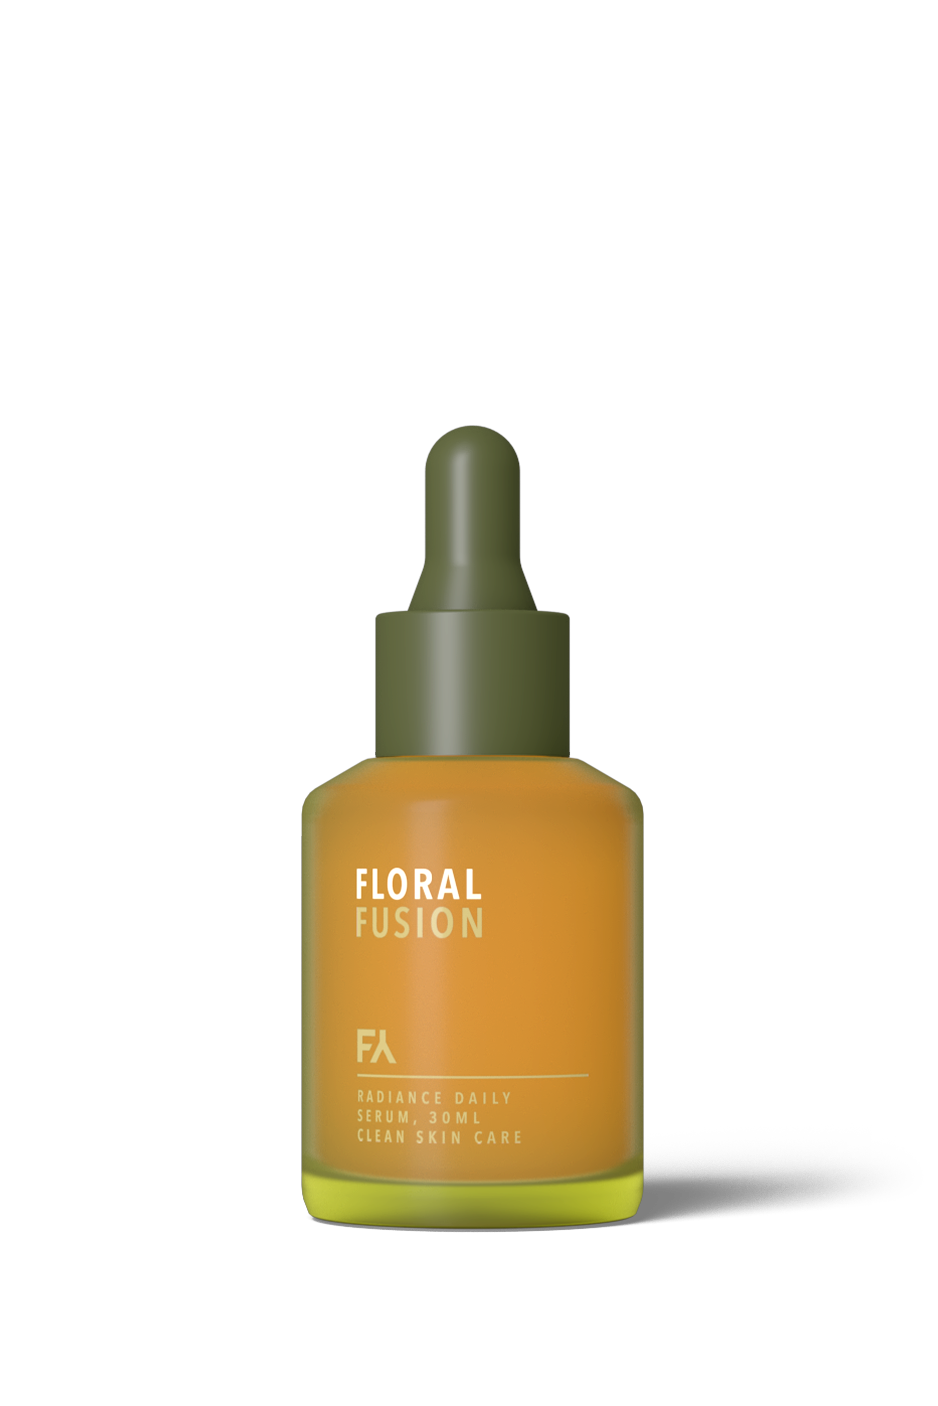 FLORAL FUSION | Radiance Daily Serum